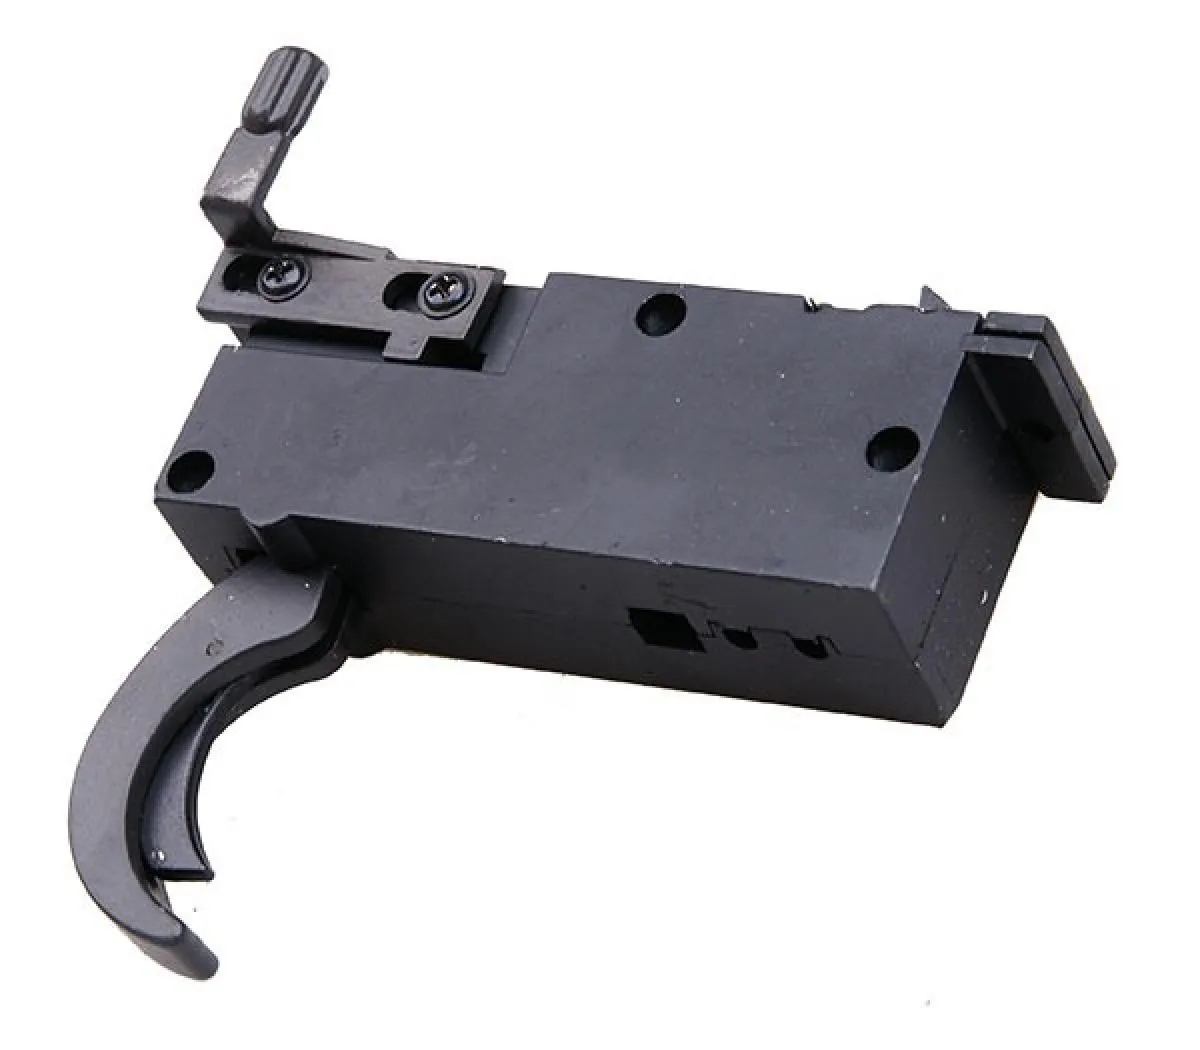 Well MB01 Trigger Kit